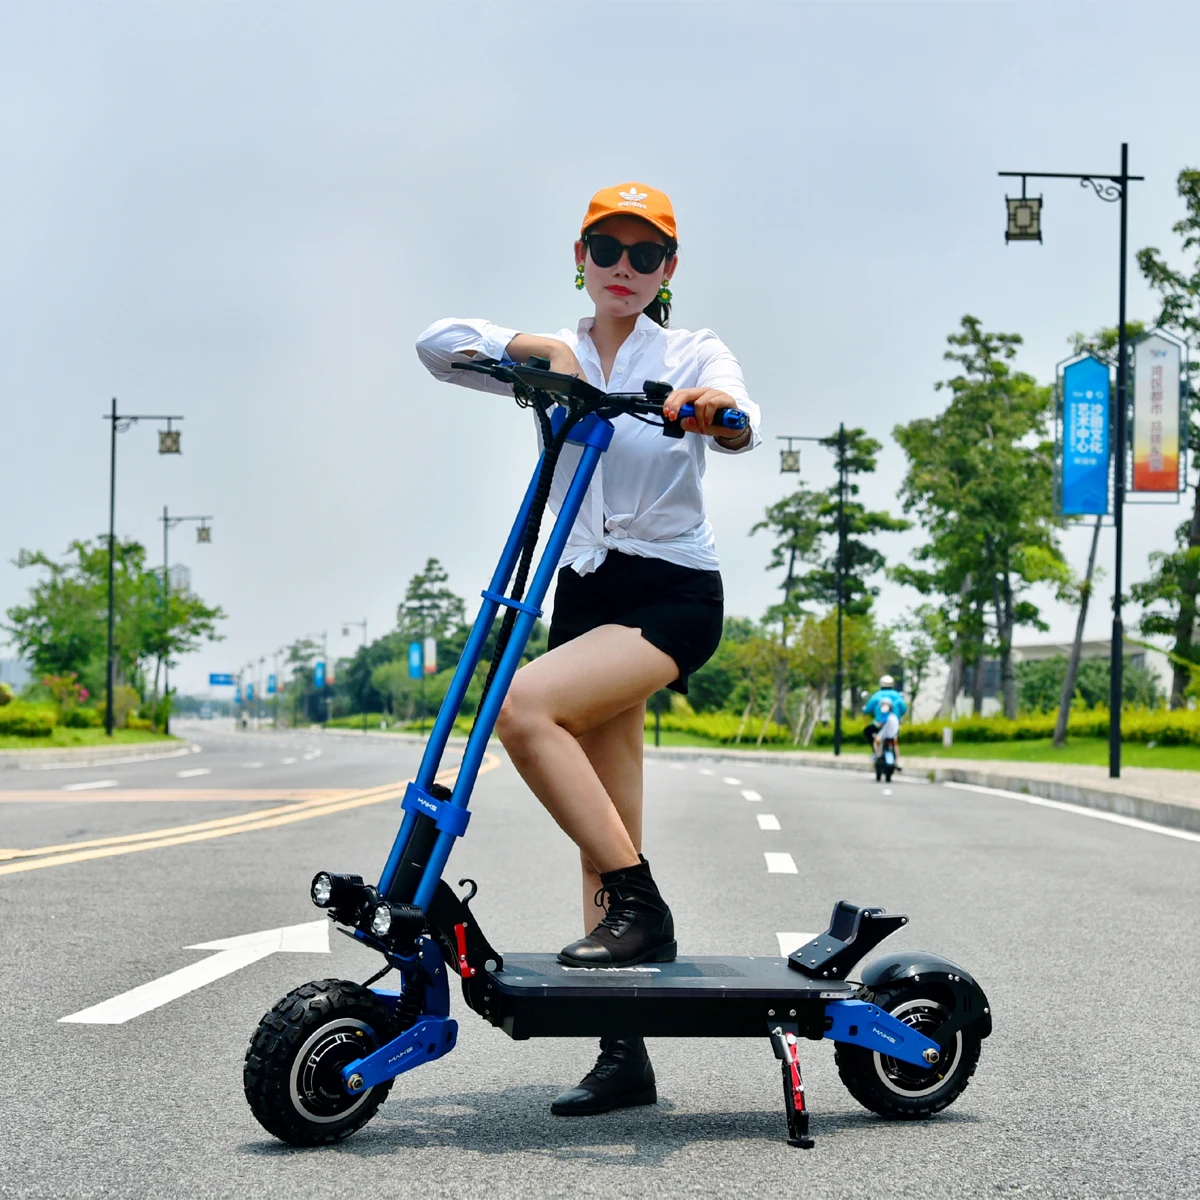 

Best Selling High Quality maike kk10s long range 100 km electric scooter fast speed powerful 5600w electric kick scooters